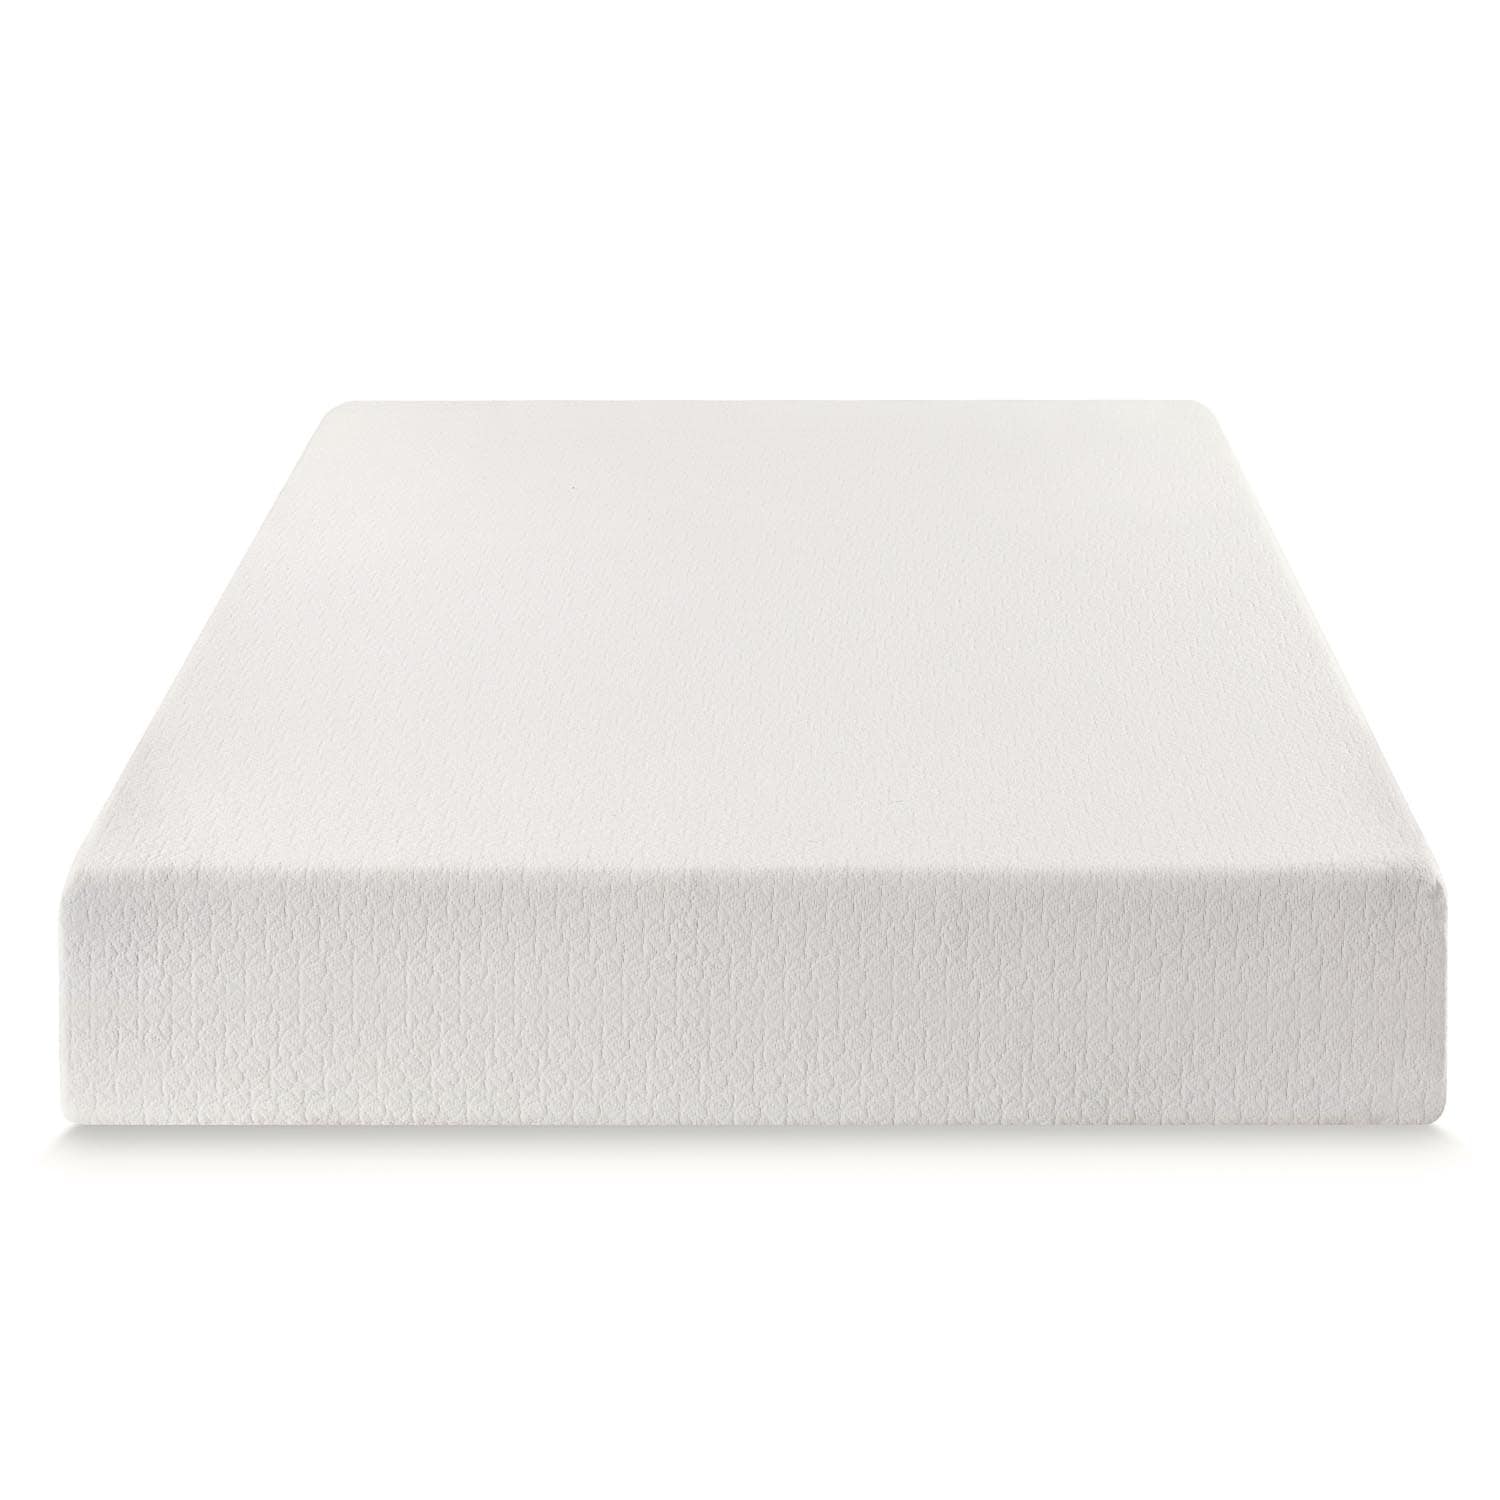 https://ak1.ostkcdn.com/images/products/is/images/direct/b61c9be644cc0c6ac691fd08259864d286116797/12-Inch-Memory-Foam-Mattress-By-Crown-Comfort.jpg